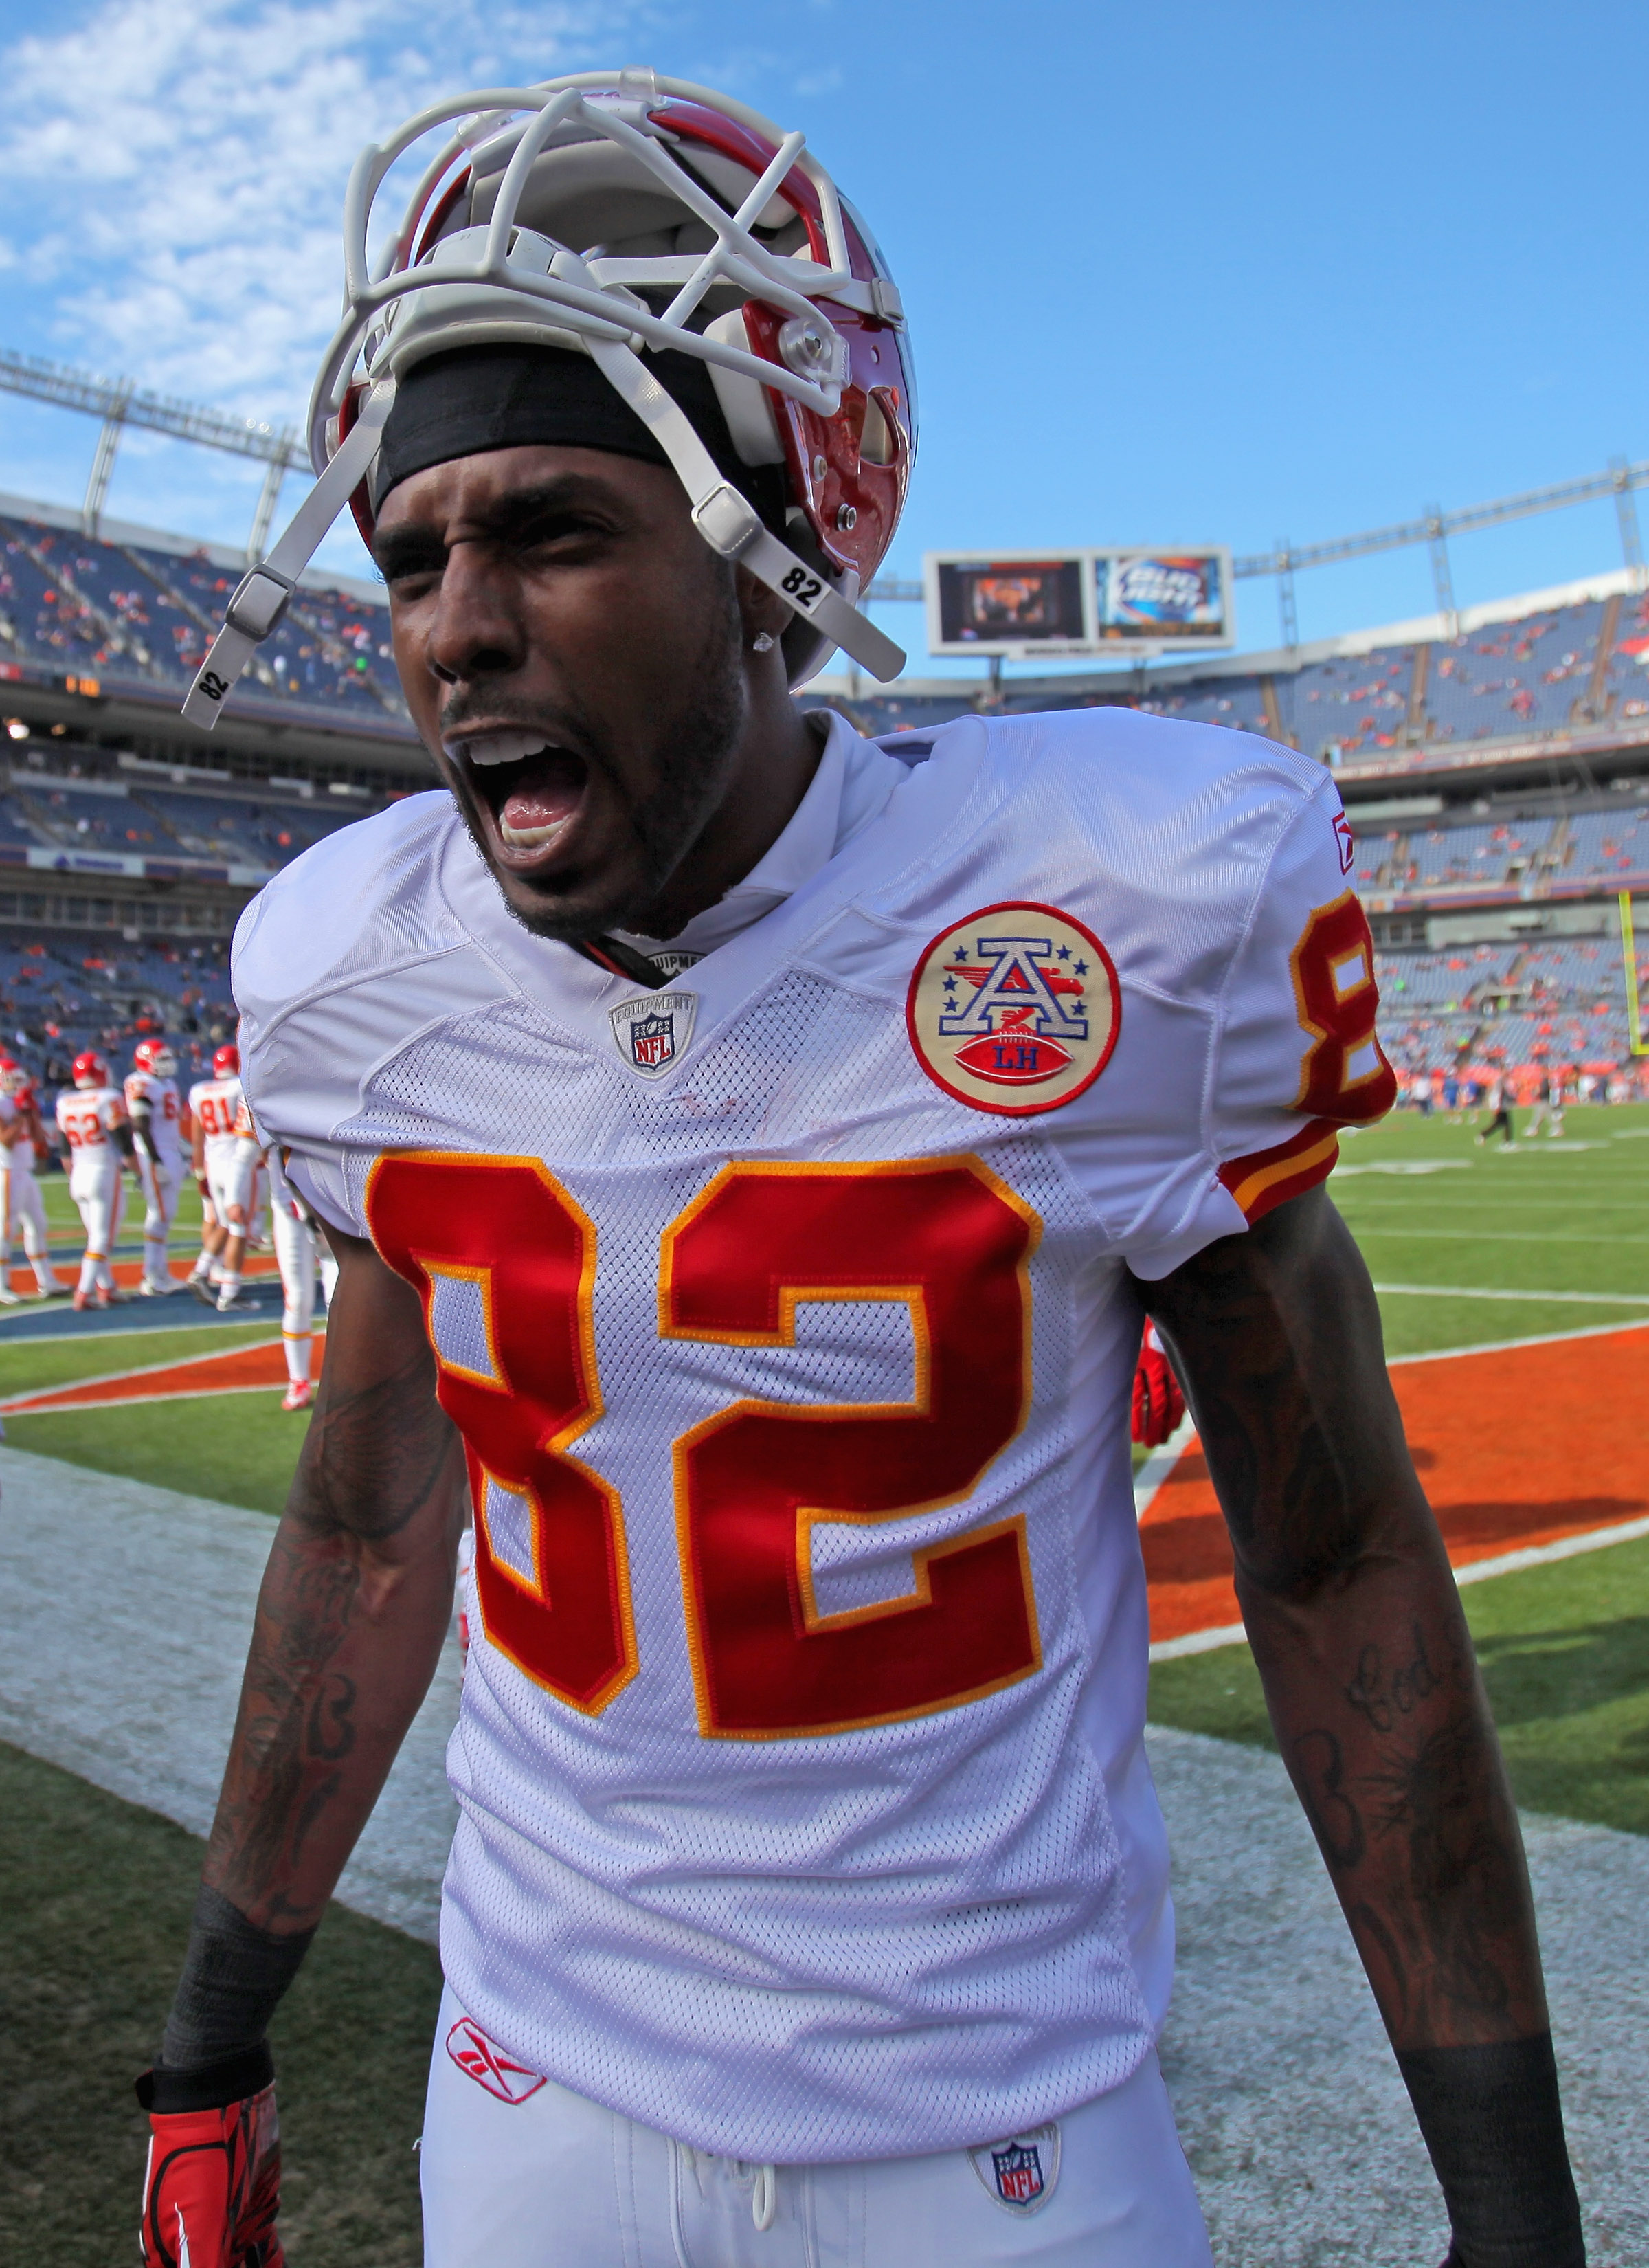 Dwayne Bowe signs 1-day contract to retire with Kansas City Chiefs